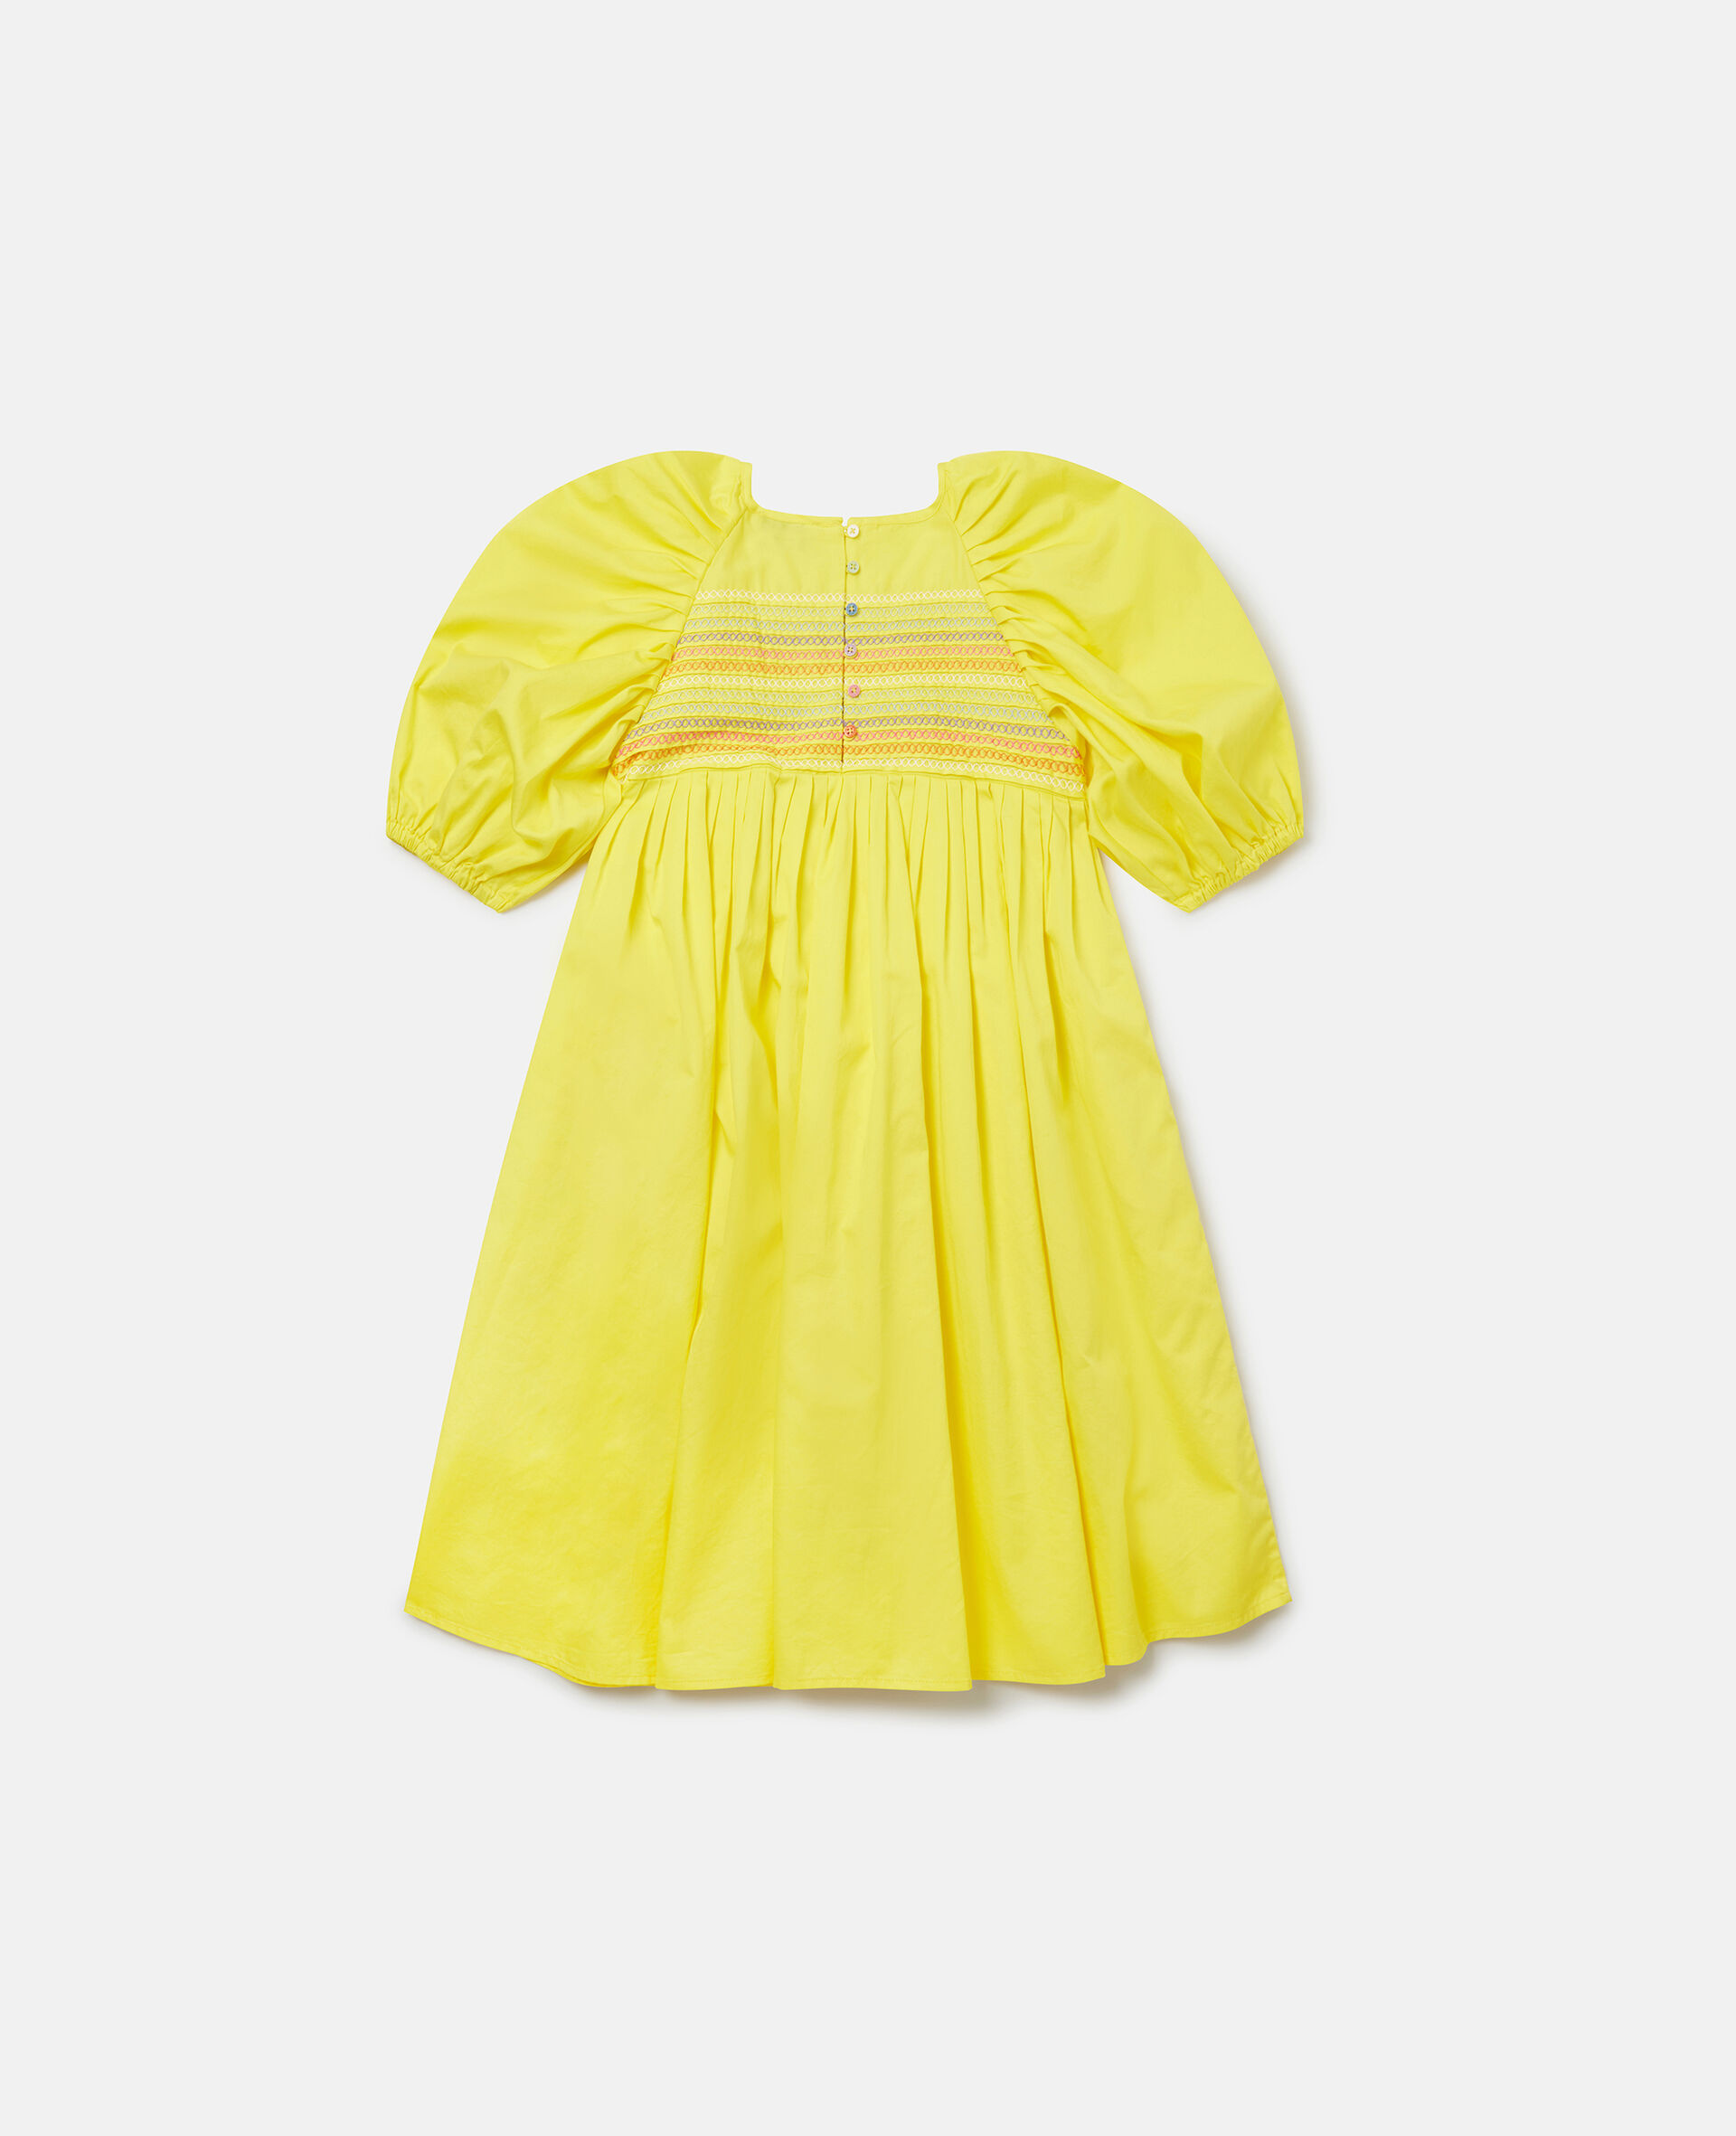 Flower Line Embroidery Smock Dress-Yellow-large image number 2